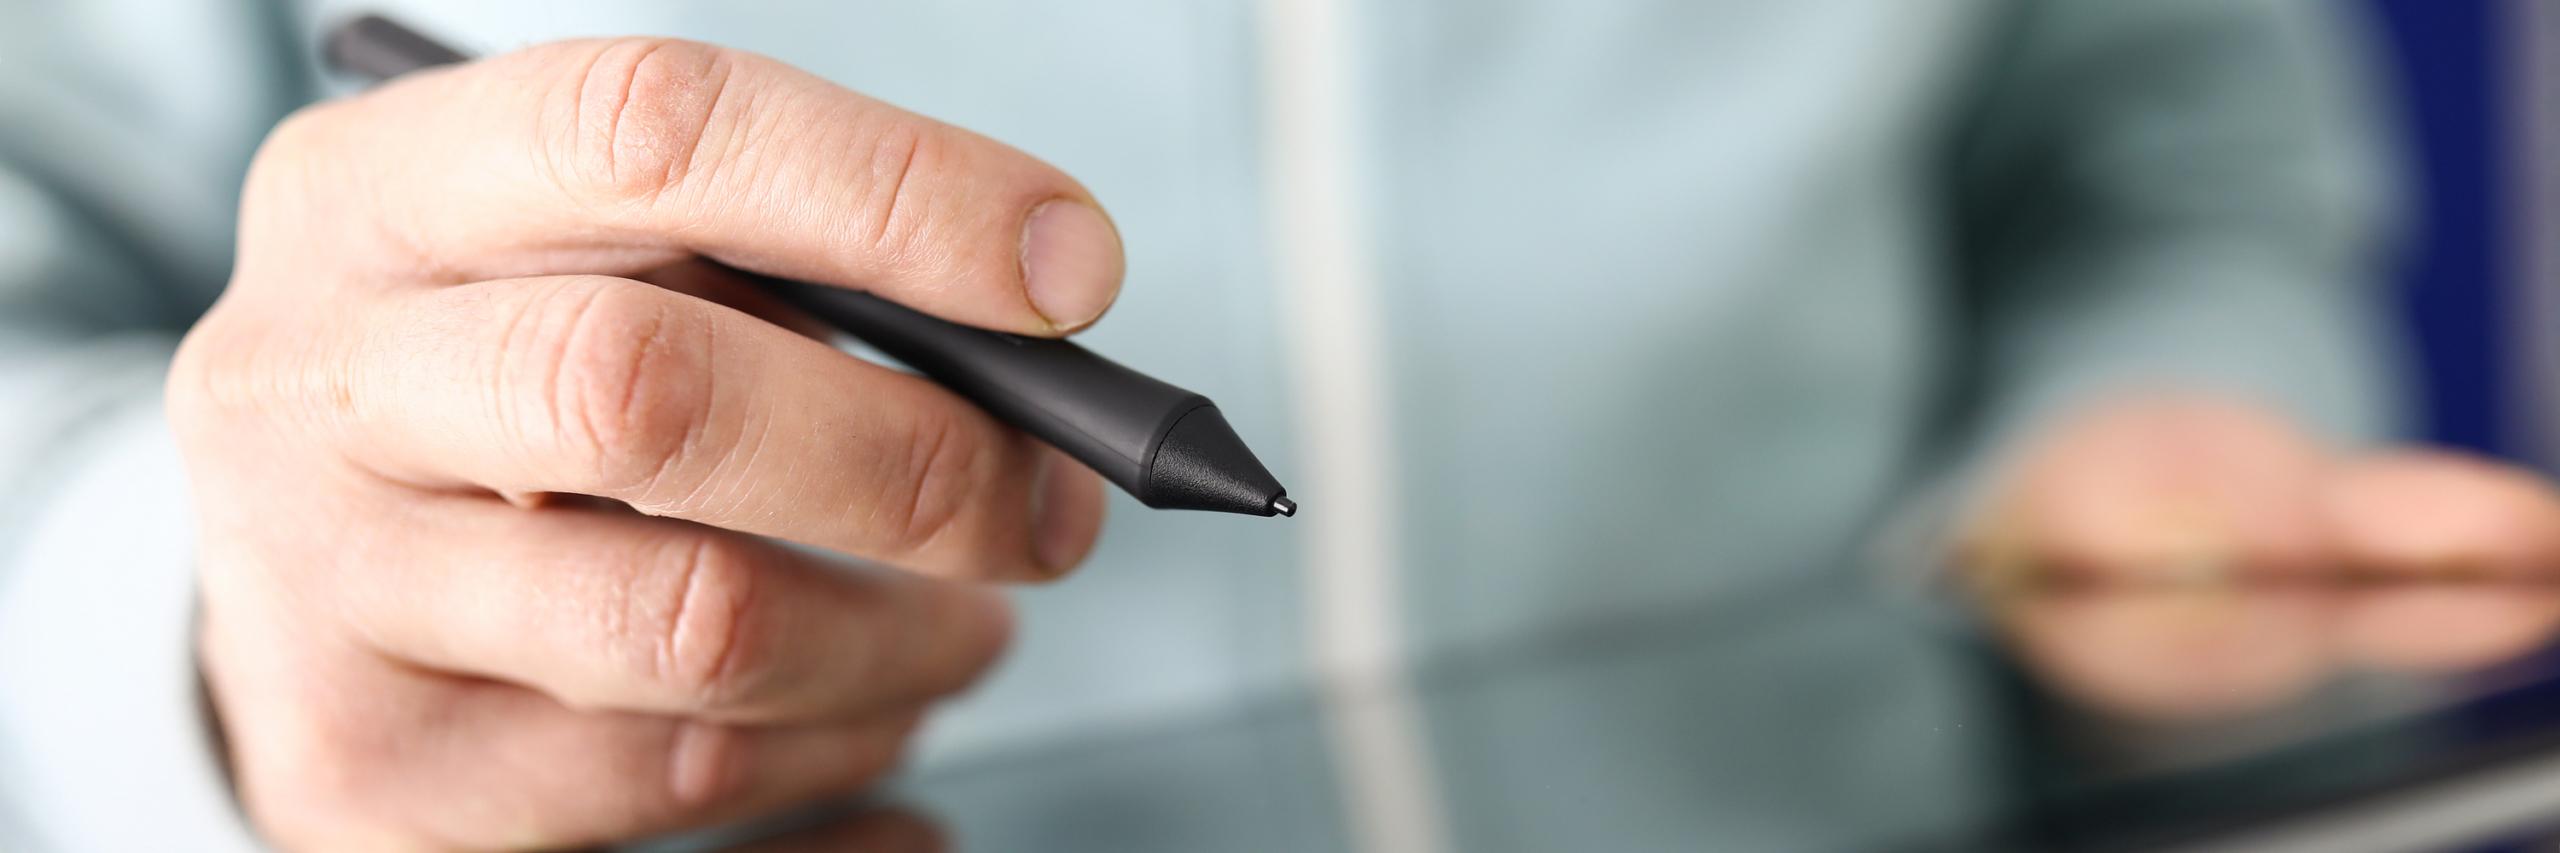 Male hand holding stylus going to make notes or seal document with digital signature close-up